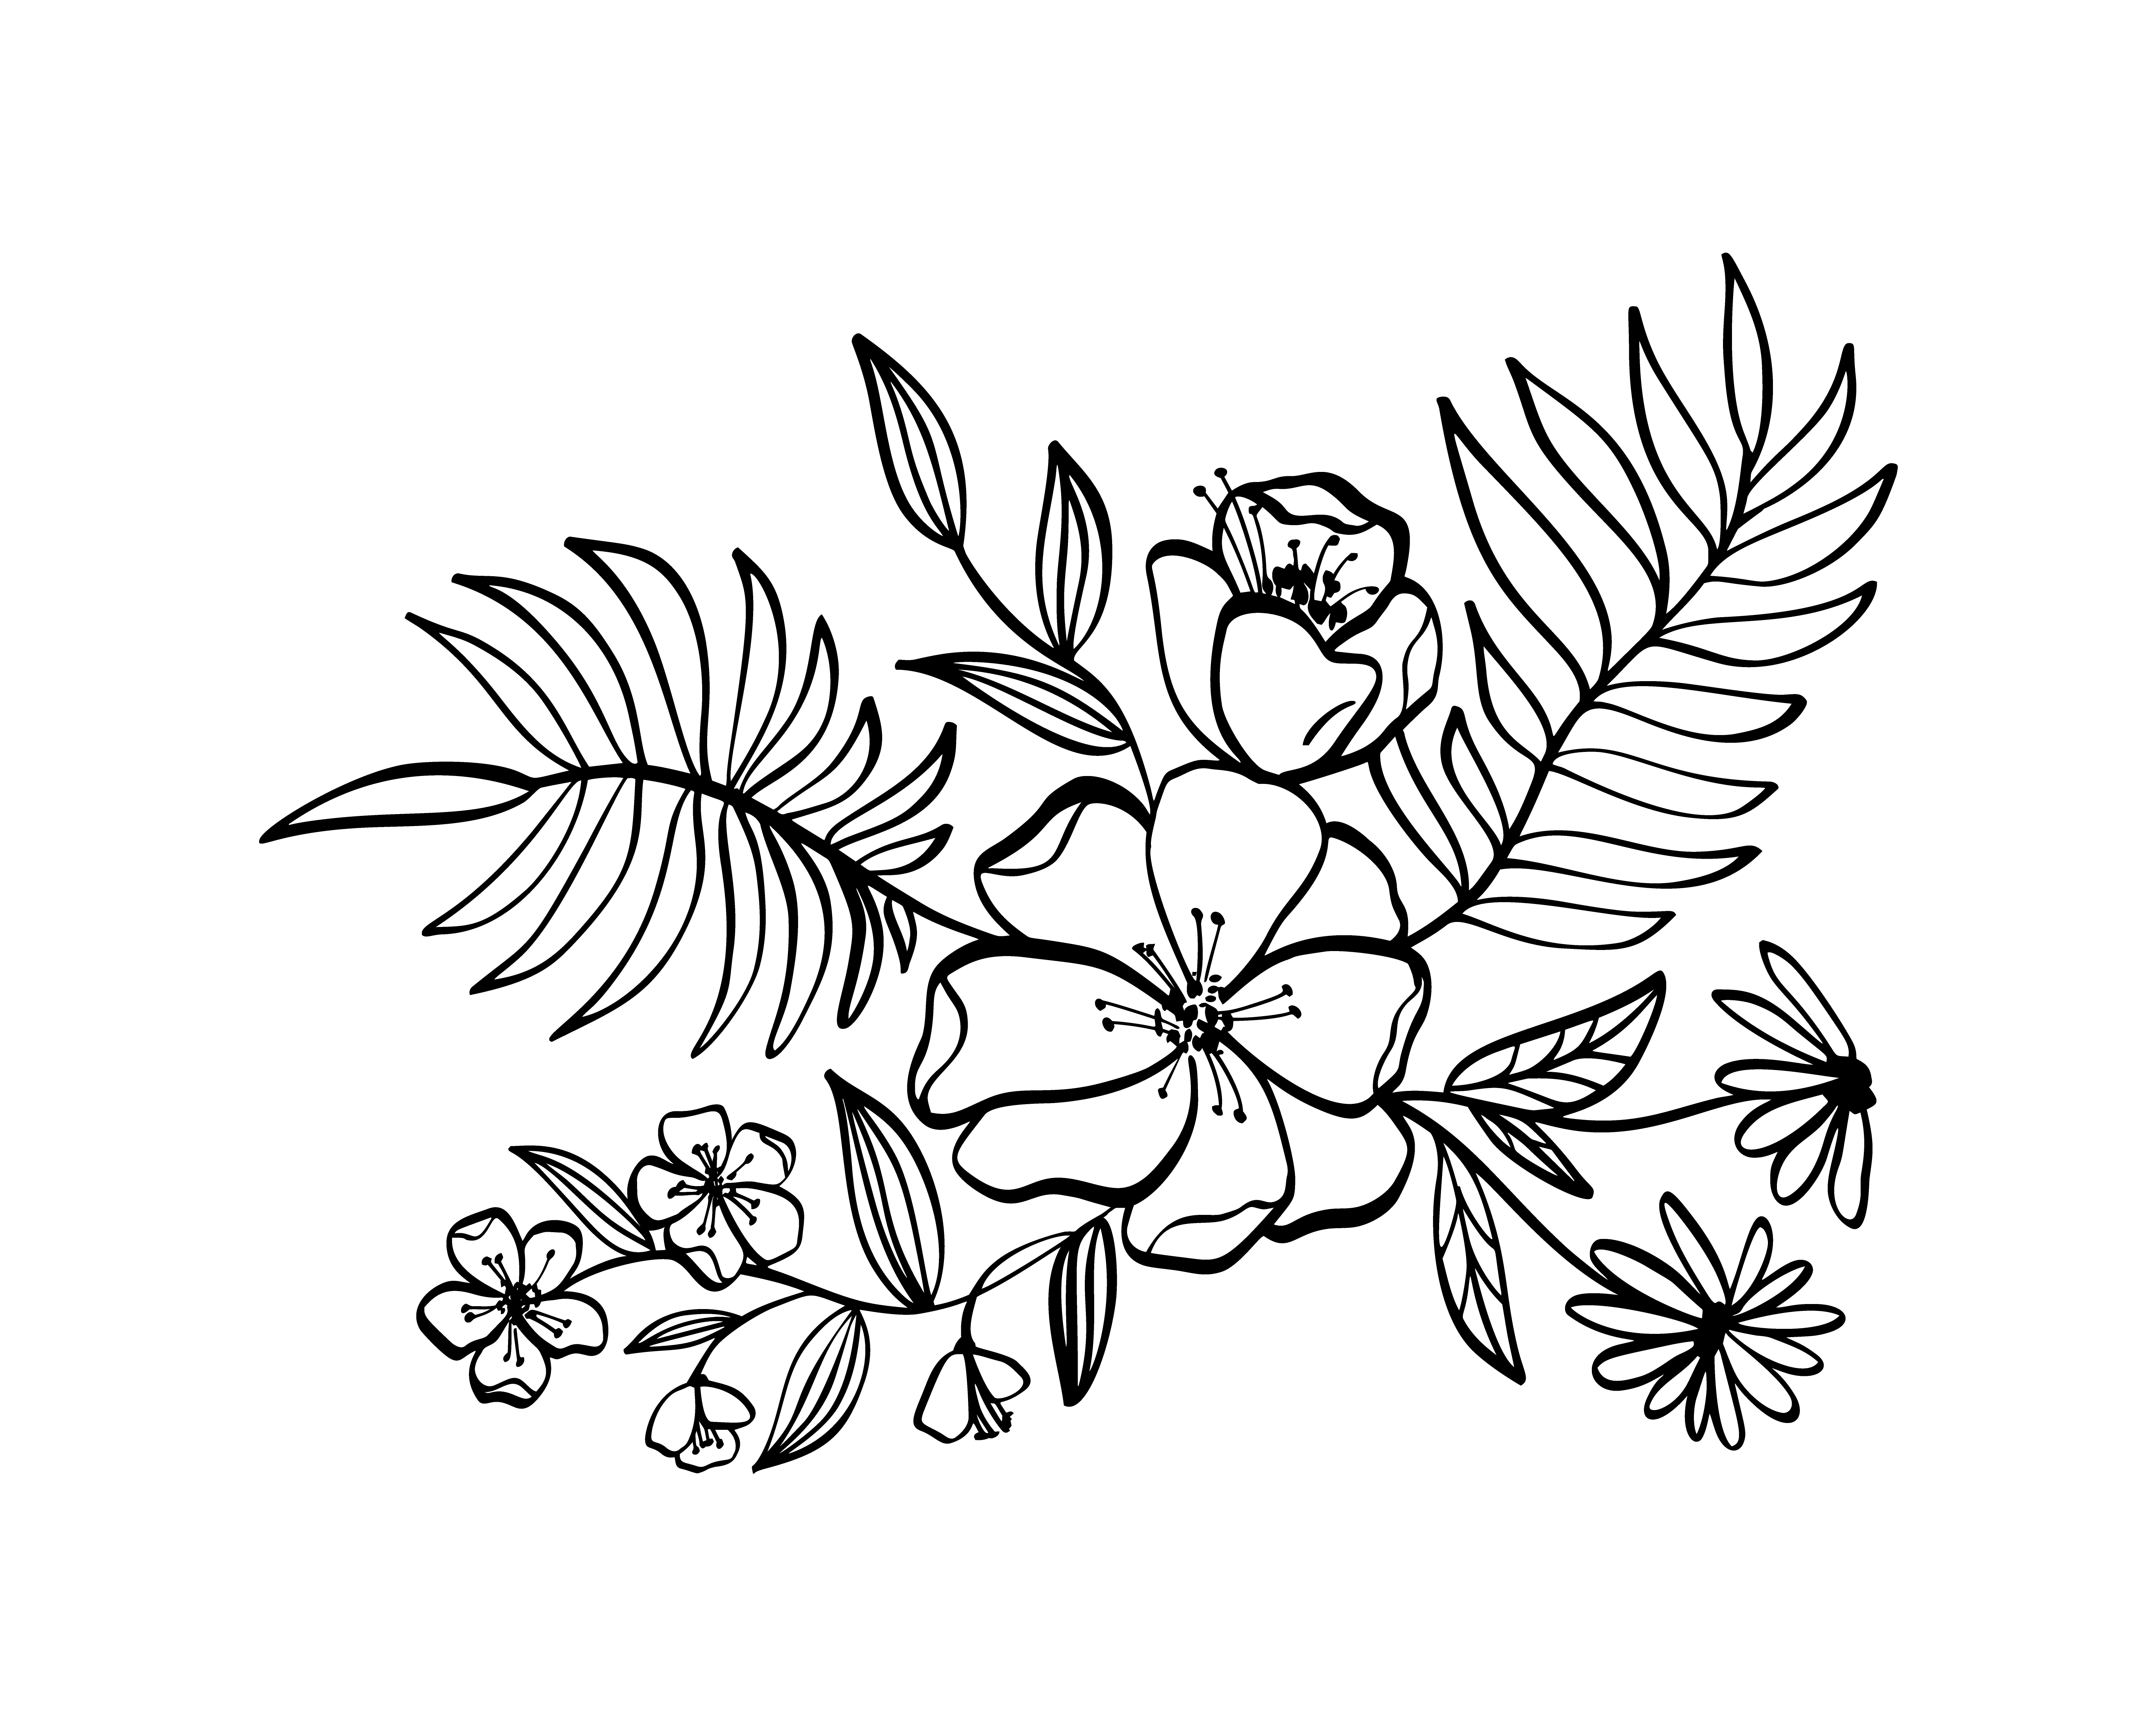 Download modern flowers drawing and sketch - Download Free Vectors ...